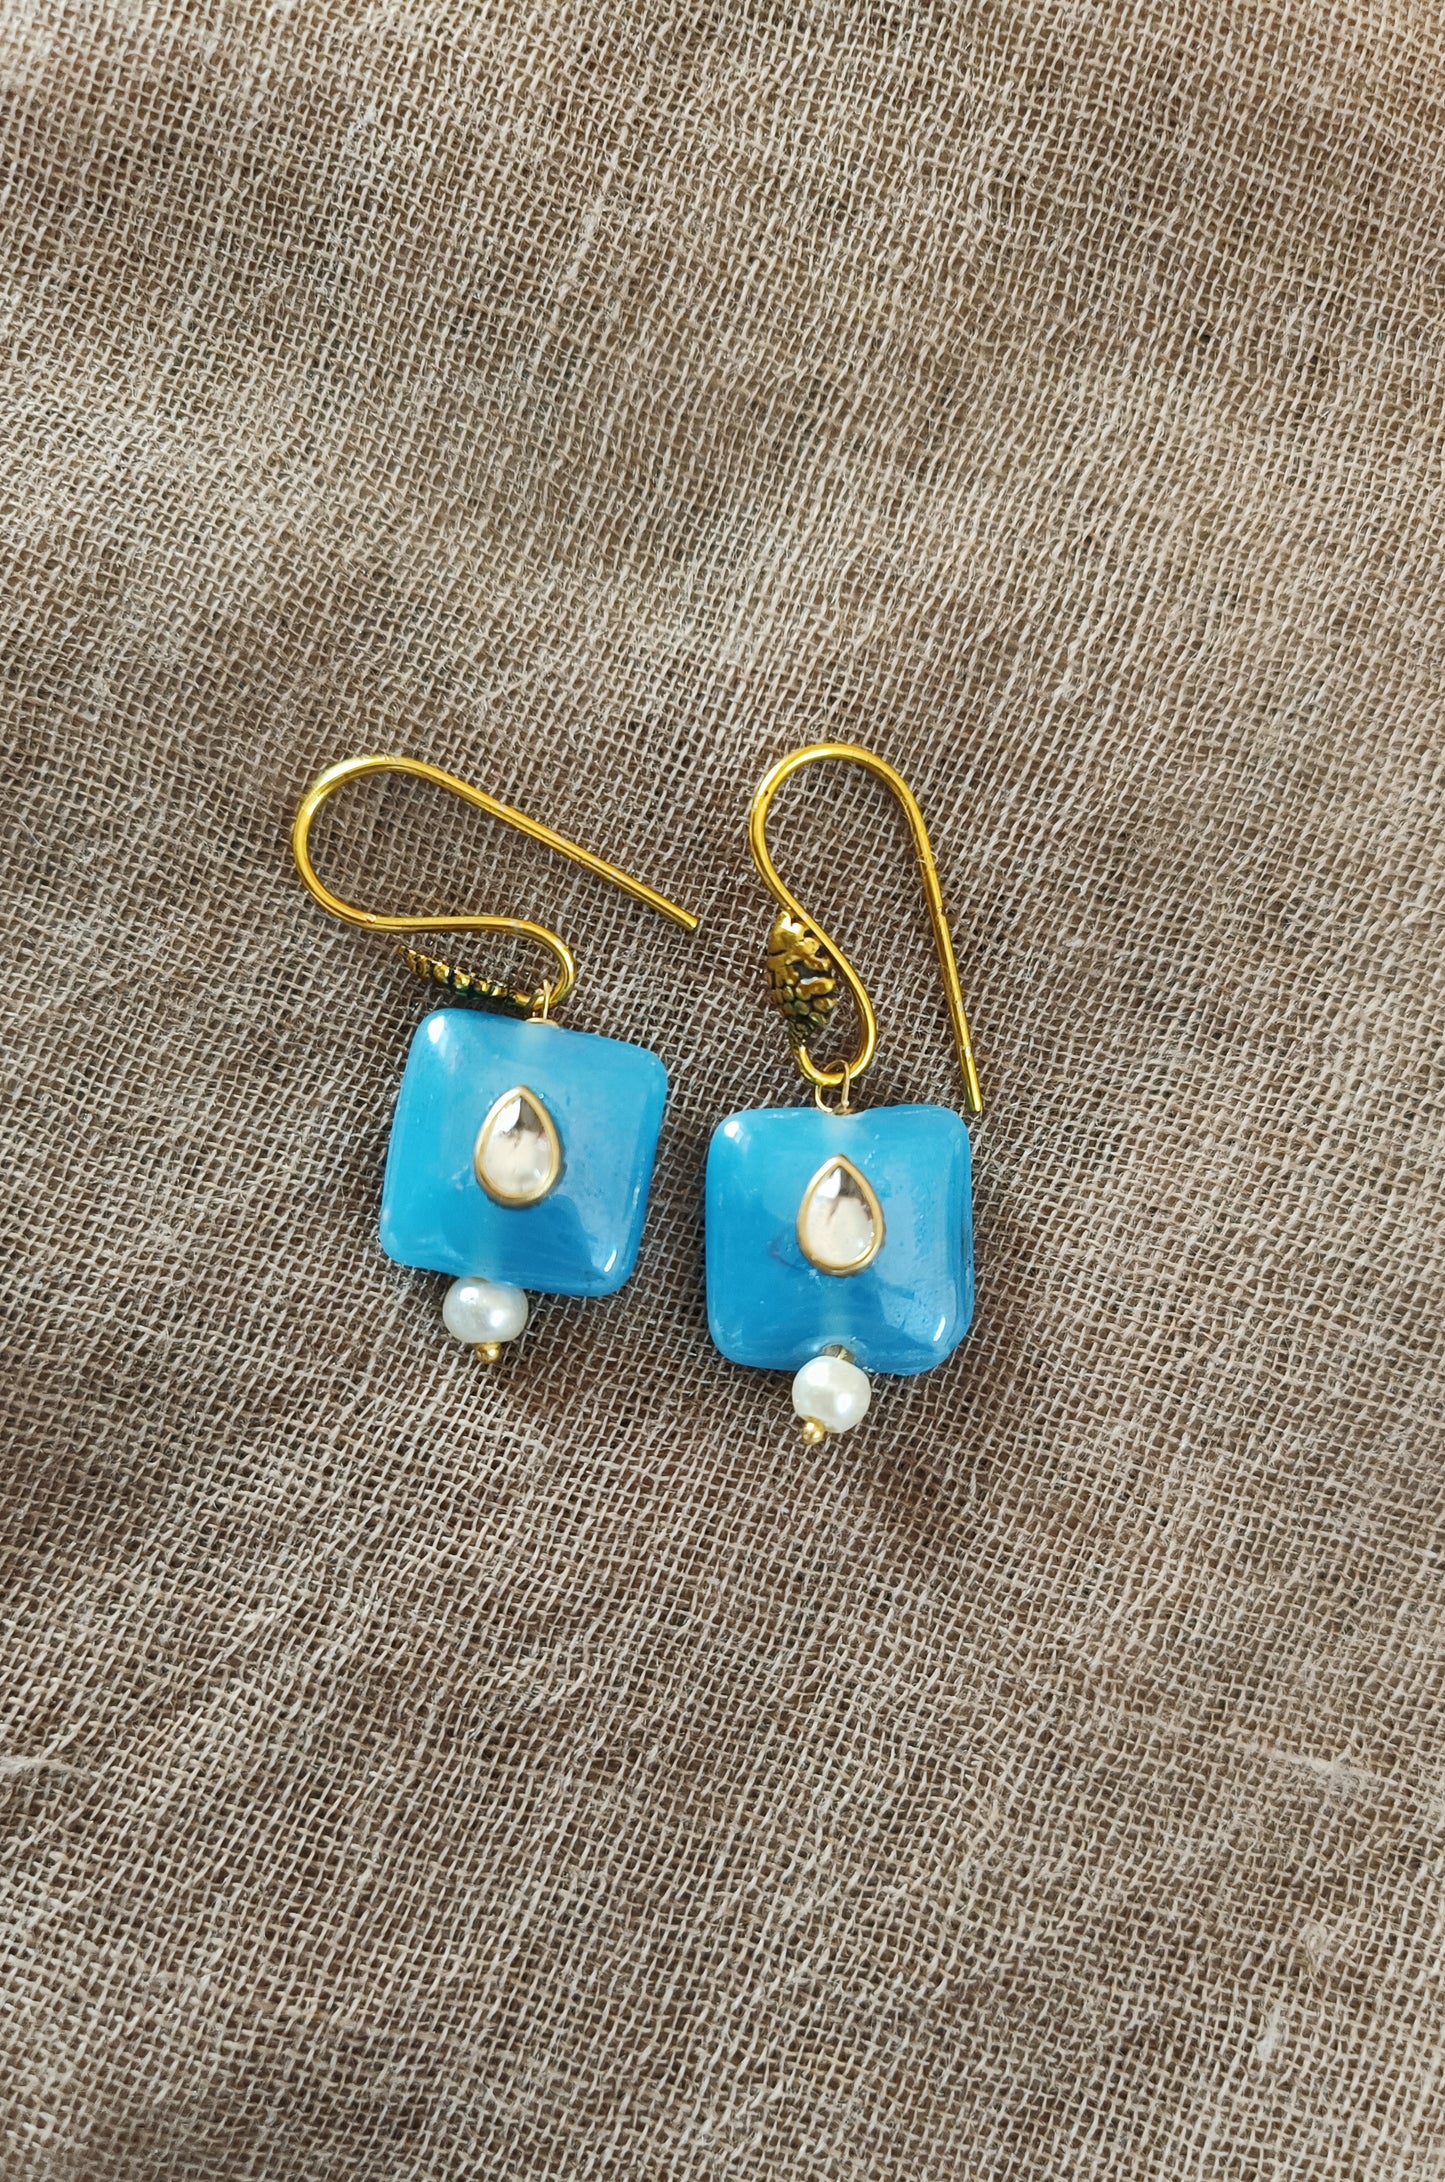 Small Hanging Earrings March